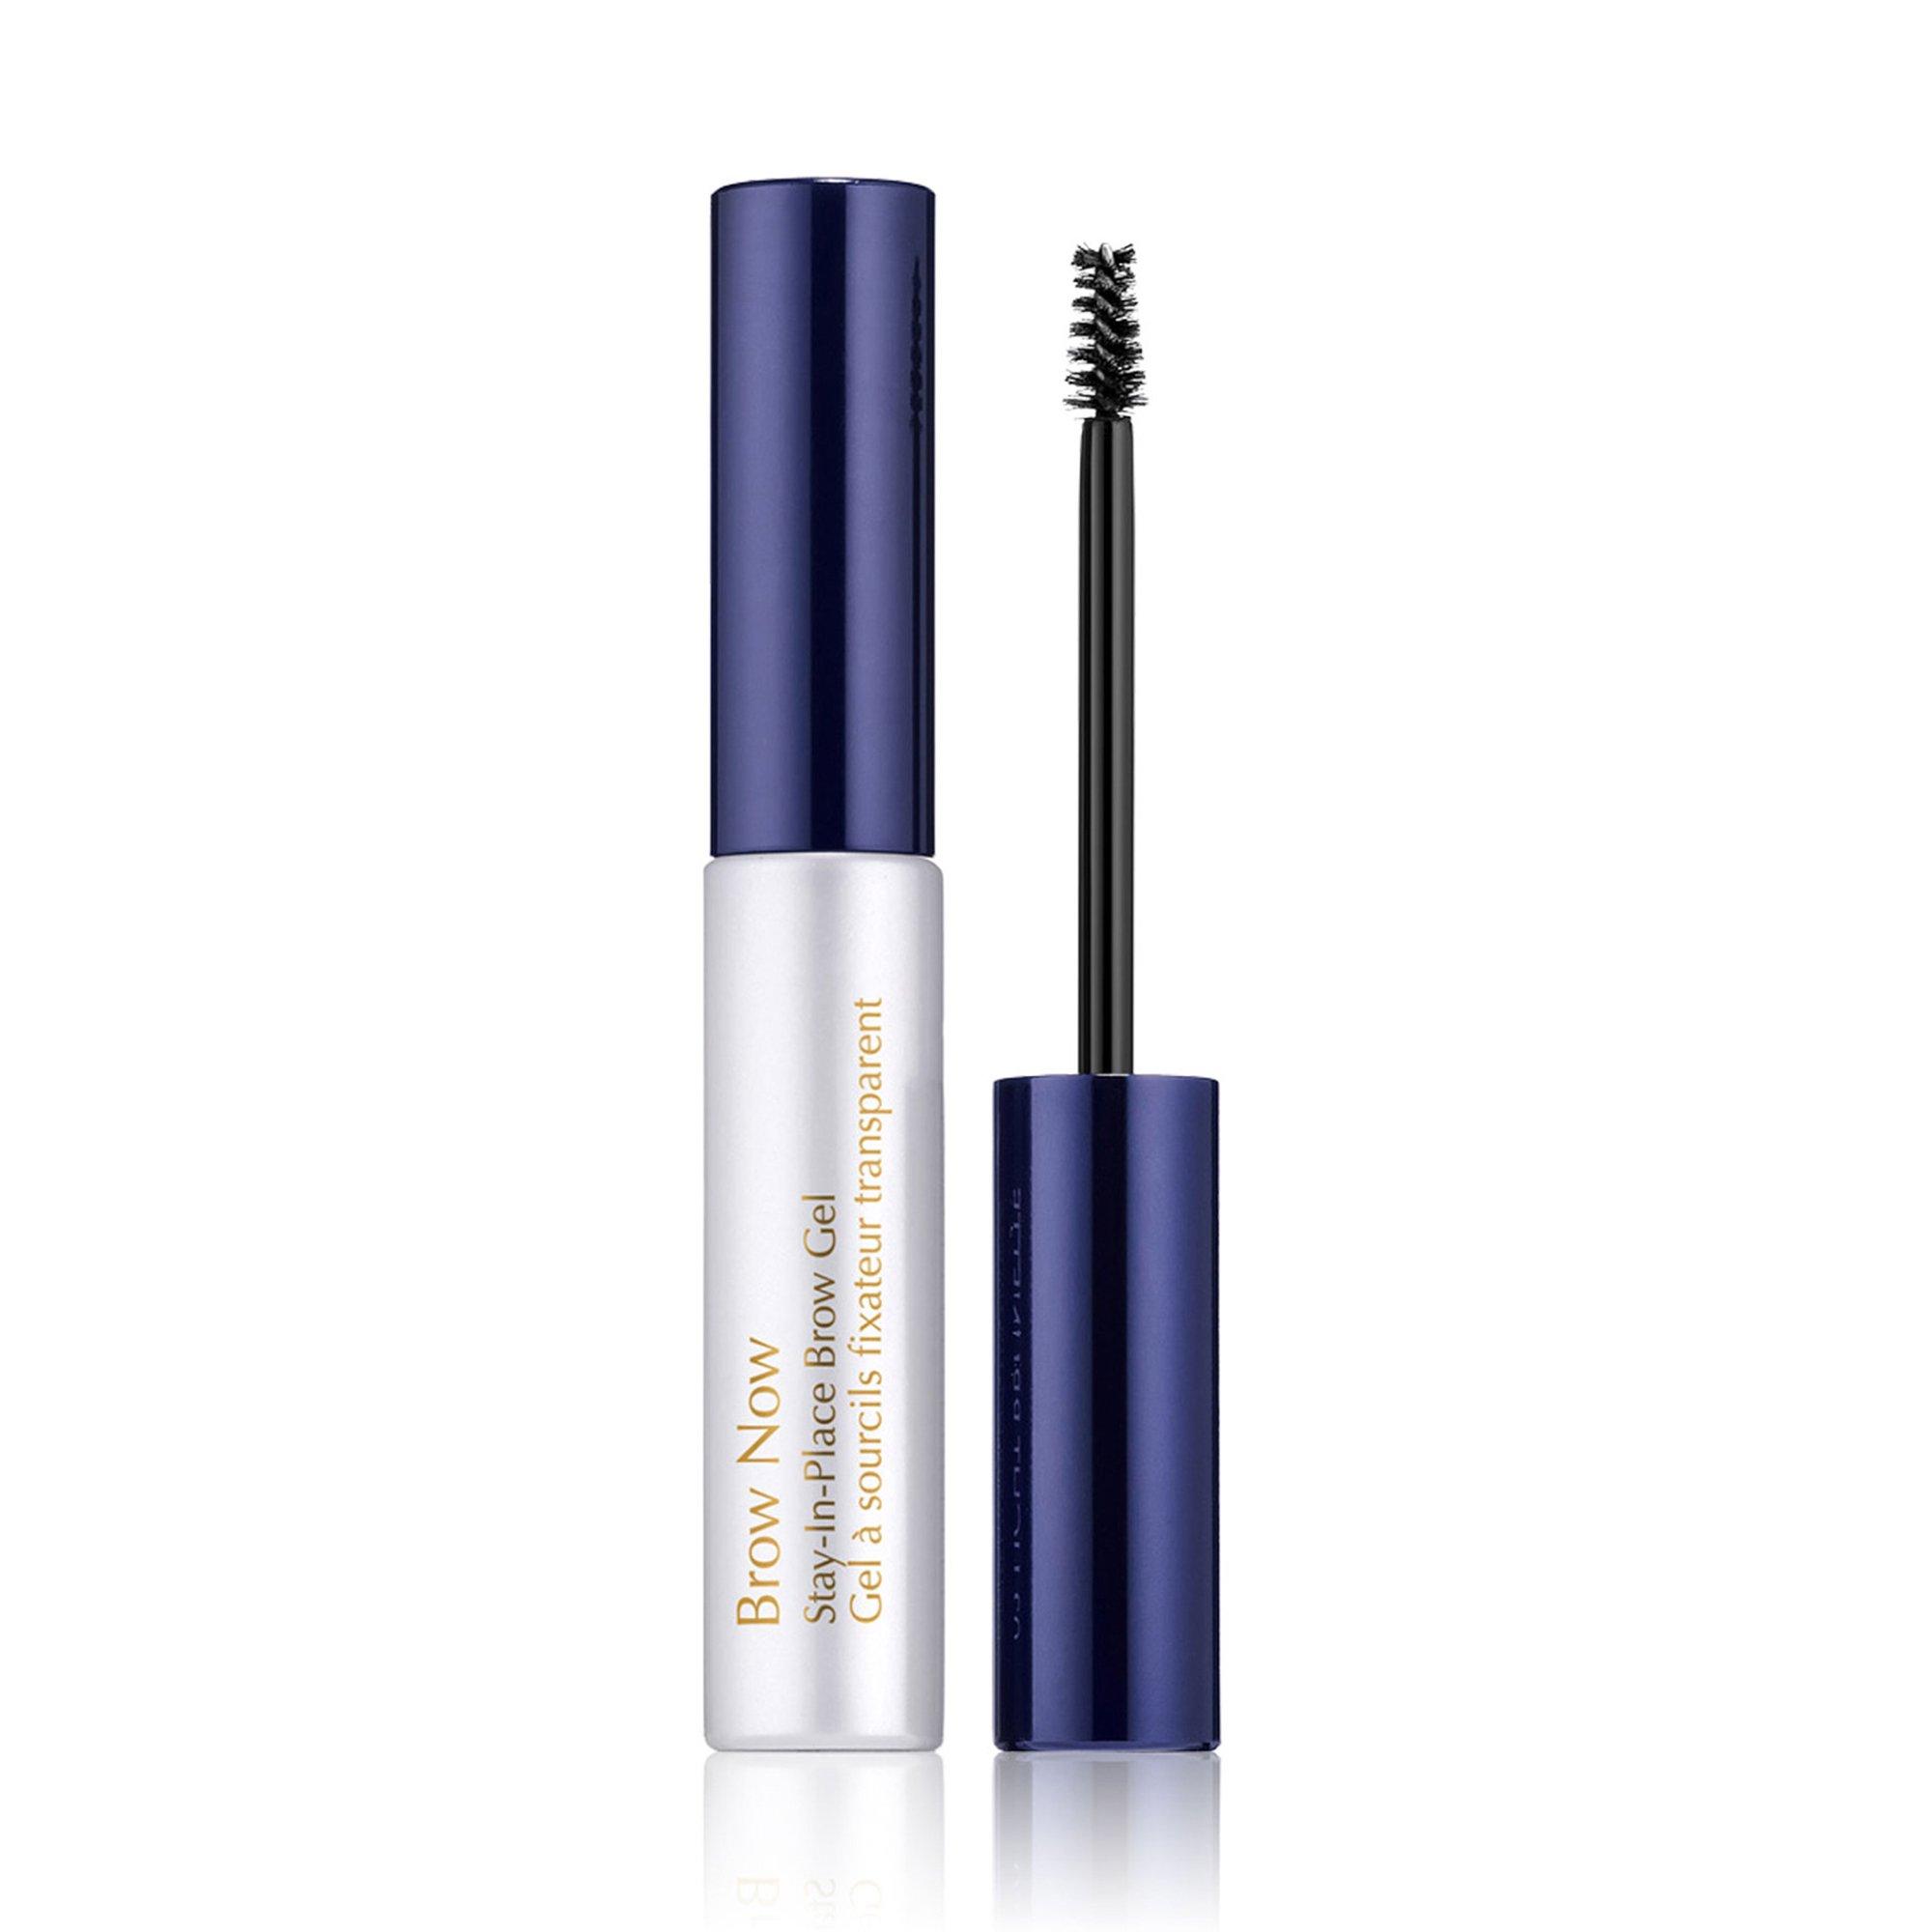 Image of ESTÉE LAUDER Brow Now Brow Now Stay-In-Place Brow Gel